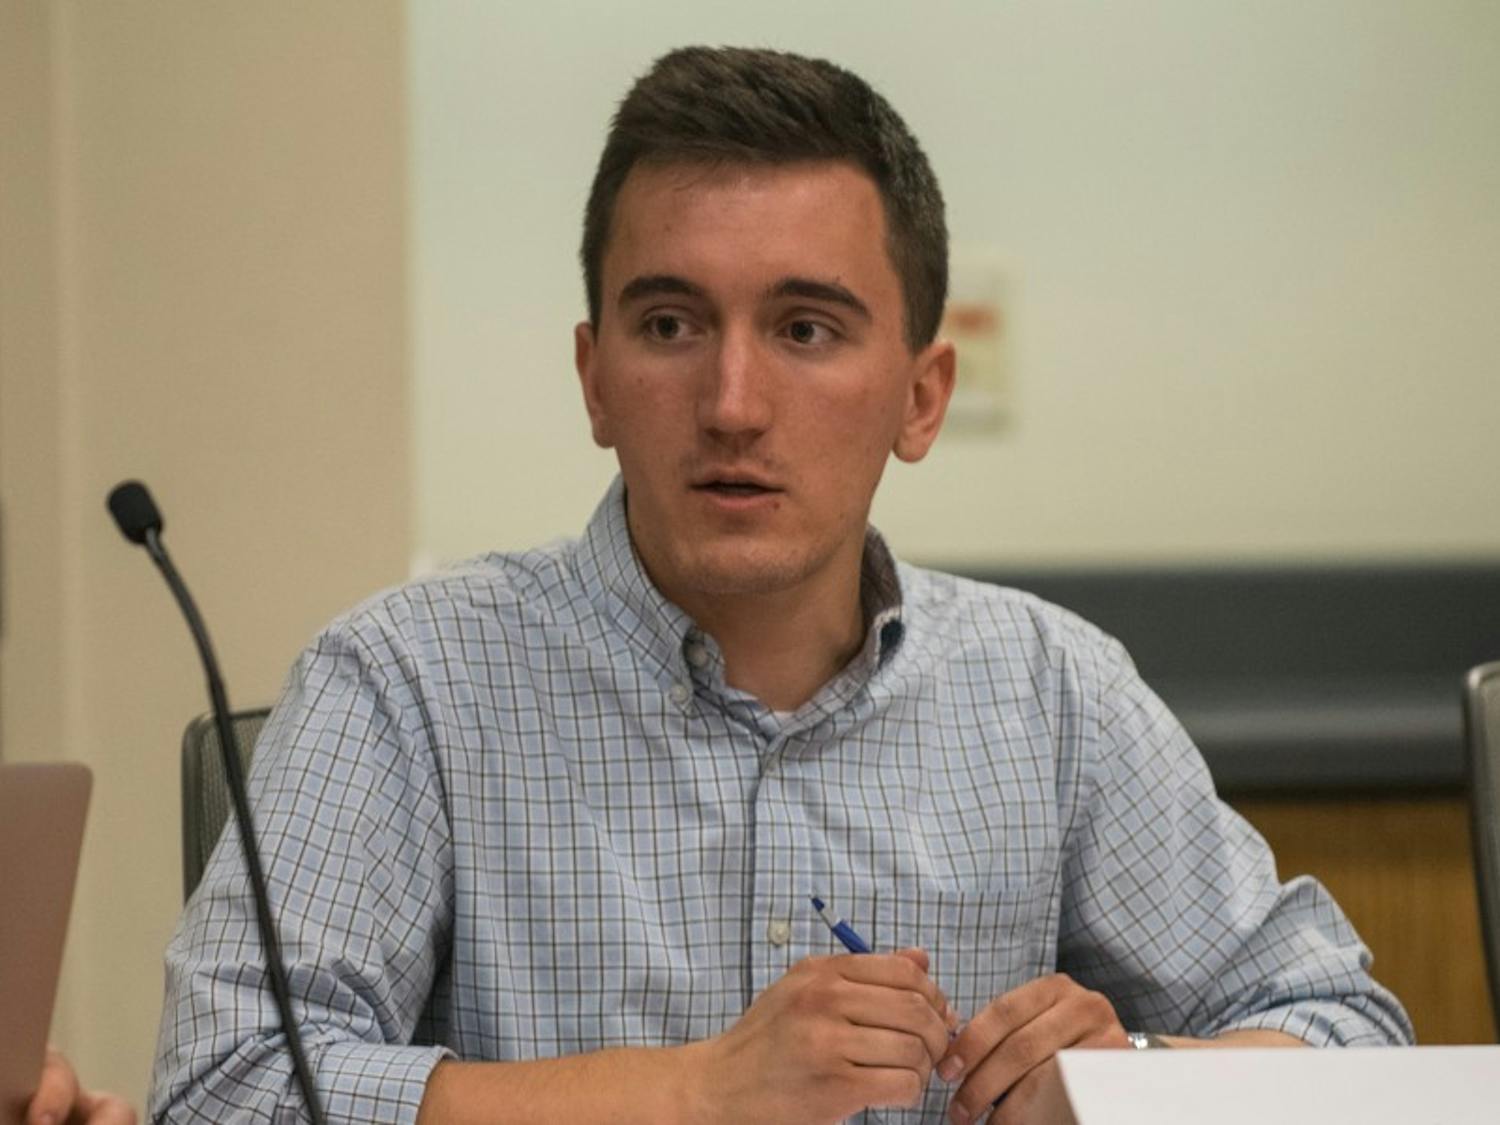 After lawsuits, Student Services Finance Committee updates policies and procedure for clarity